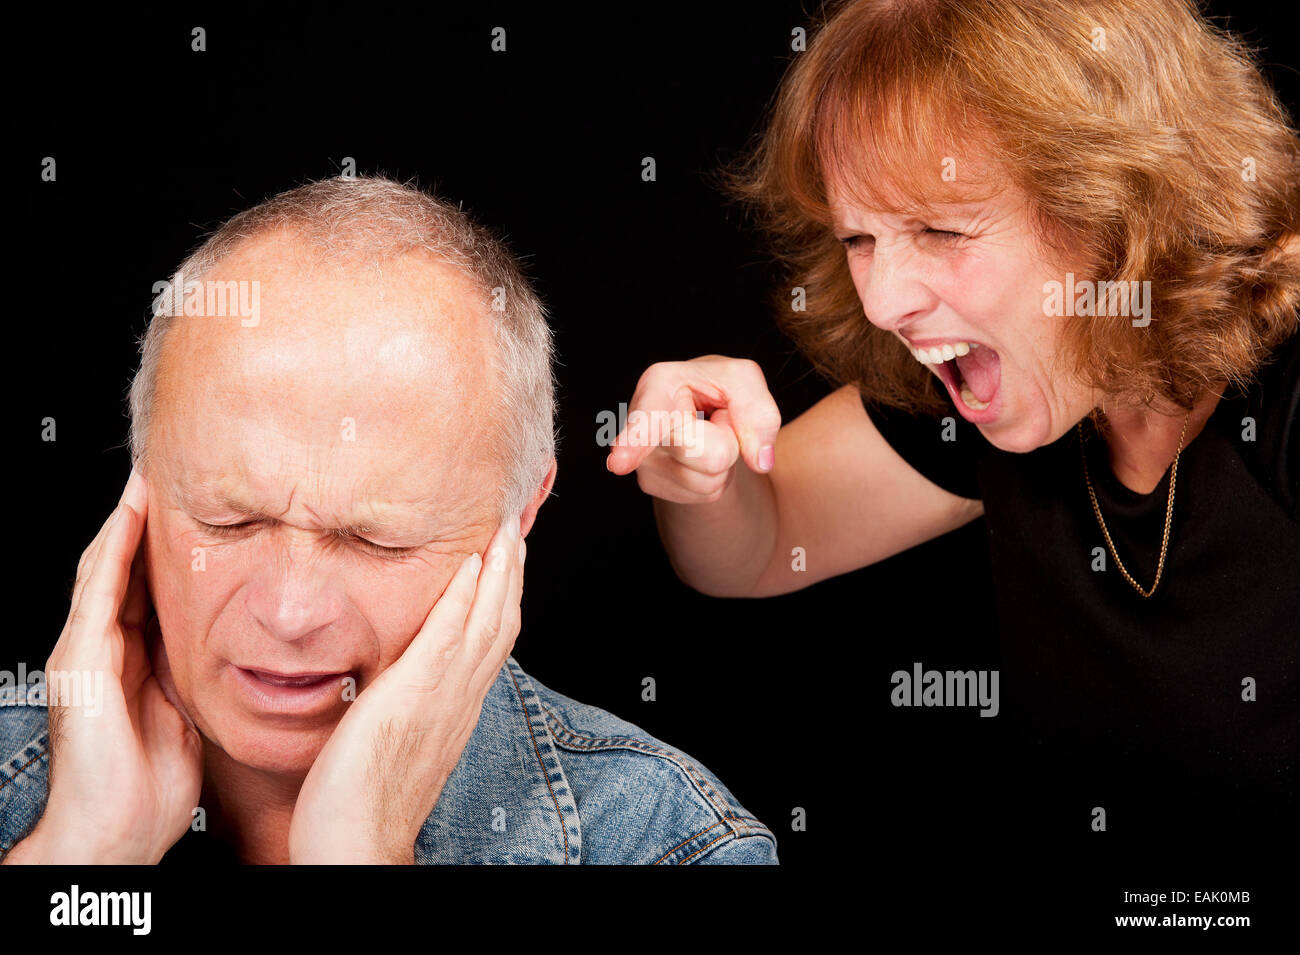 Middle aged couple having an argument, with the woman shouting and pointing finger at the crying man. Stock Photo